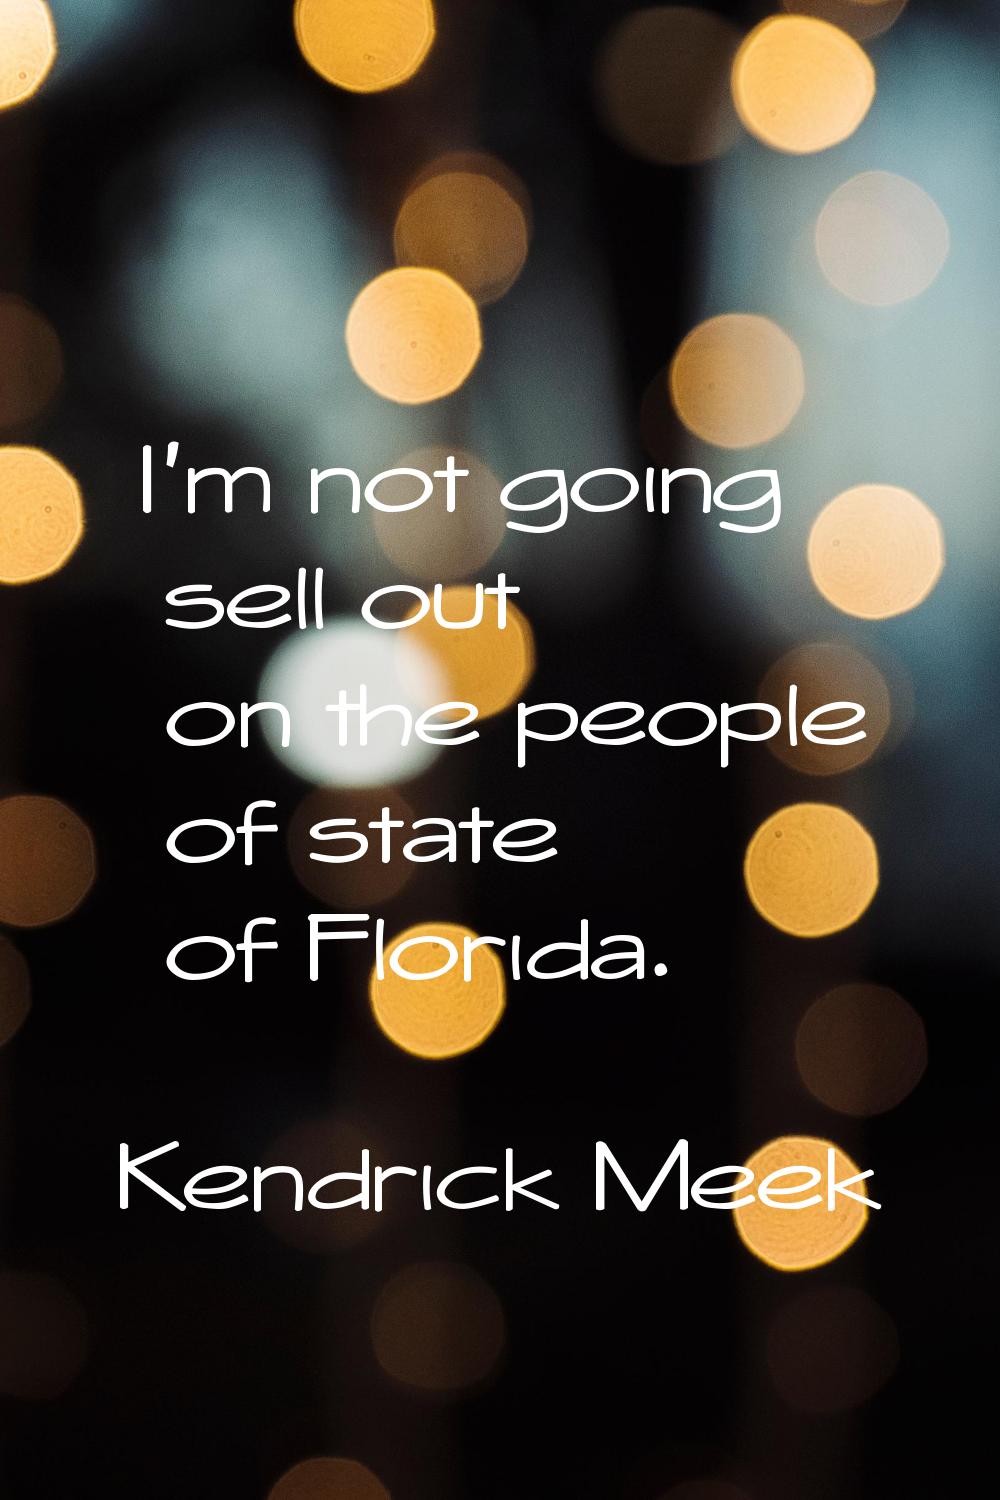 I'm not going sell out on the people of state of Florida.